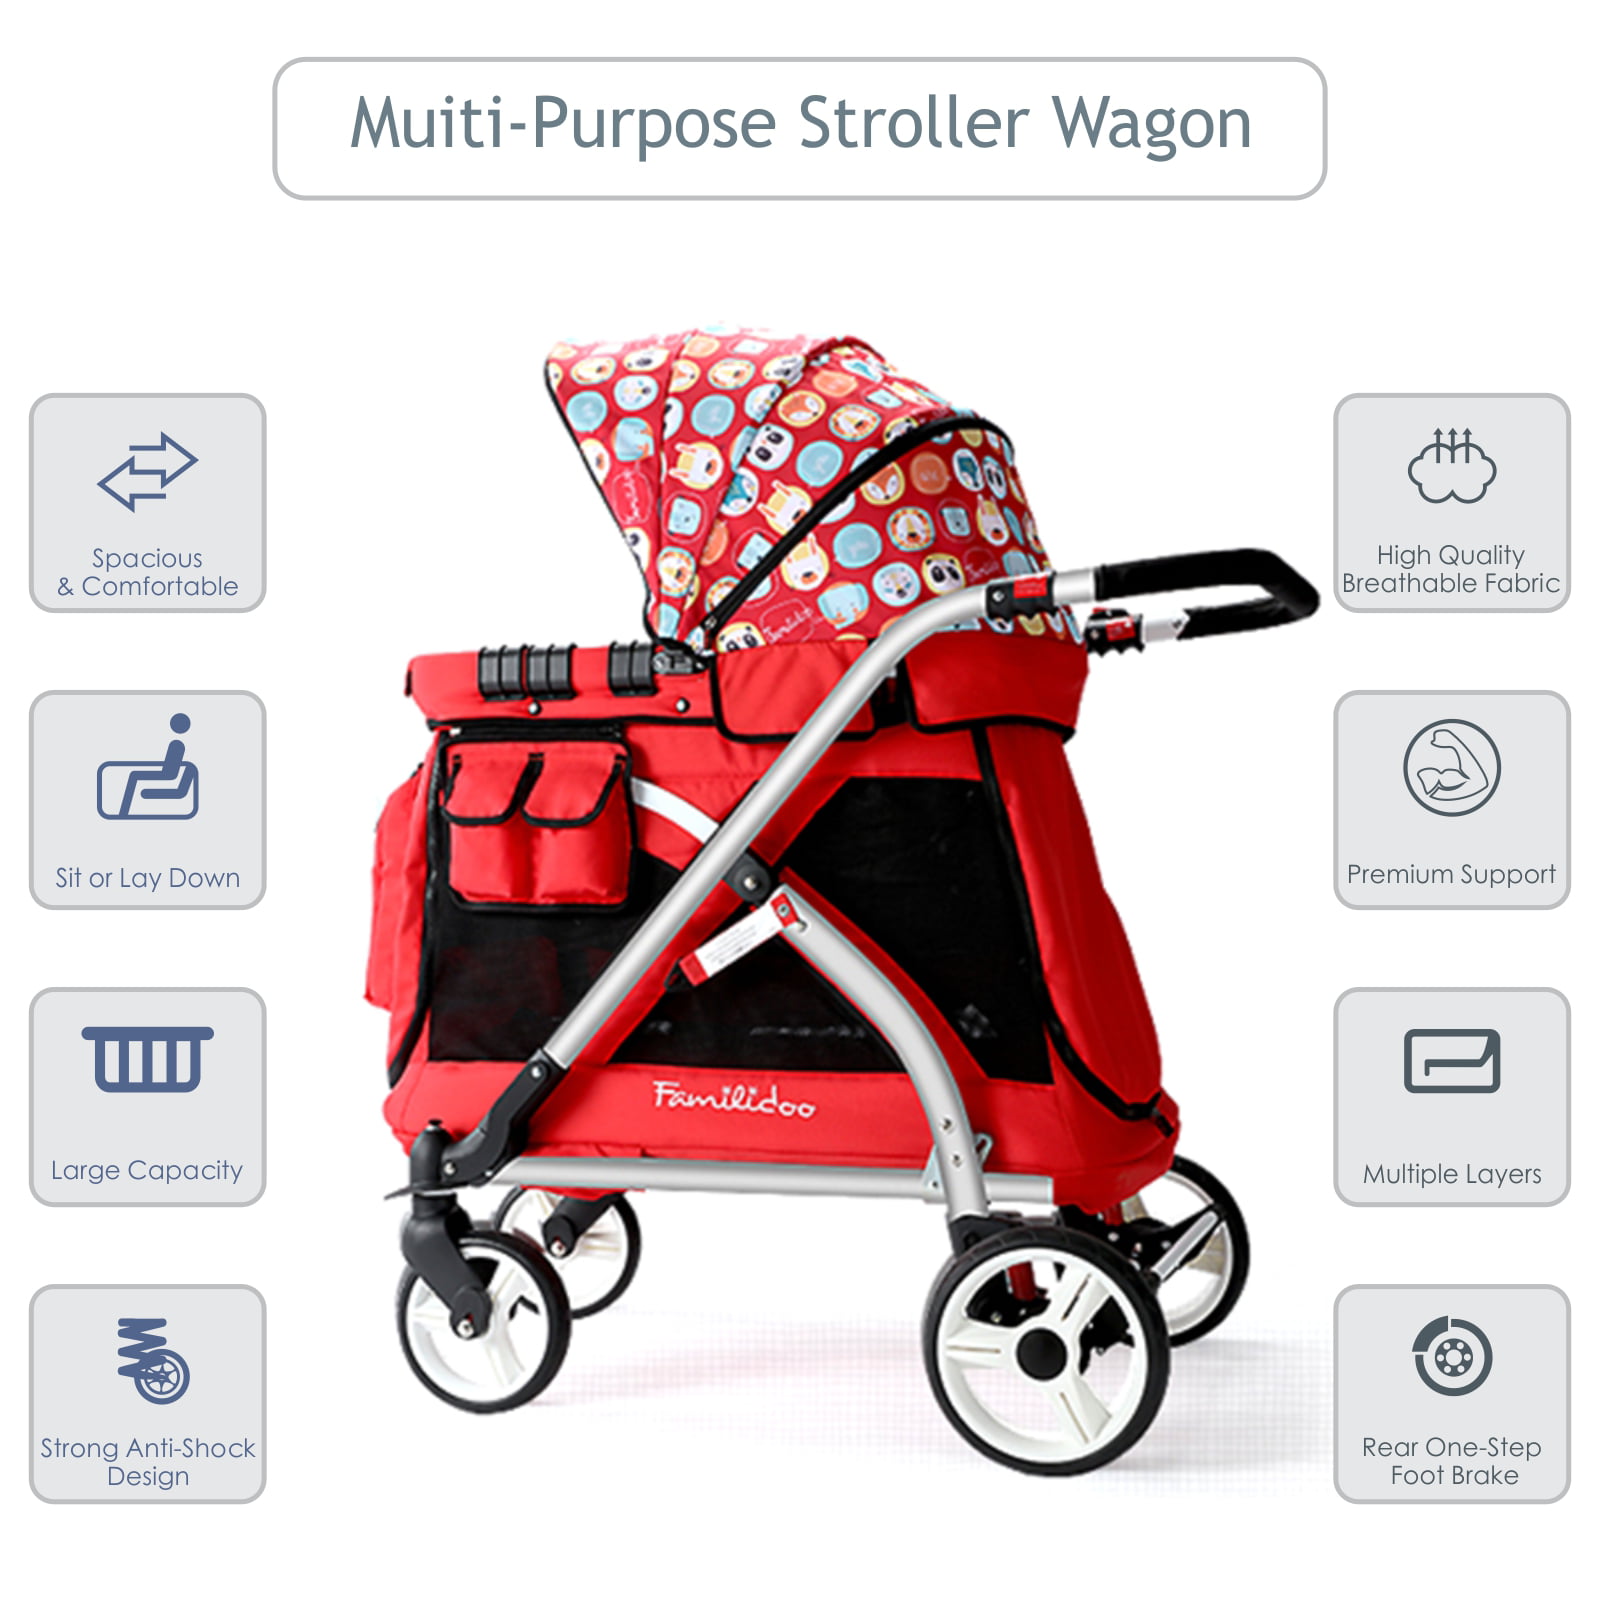 Chariot Mini Black Removable & Reversible Canopy Zipper Doors Familidoo Multi-Purpose Folding Single Stroller Wagon with Deep Carriage Seat 